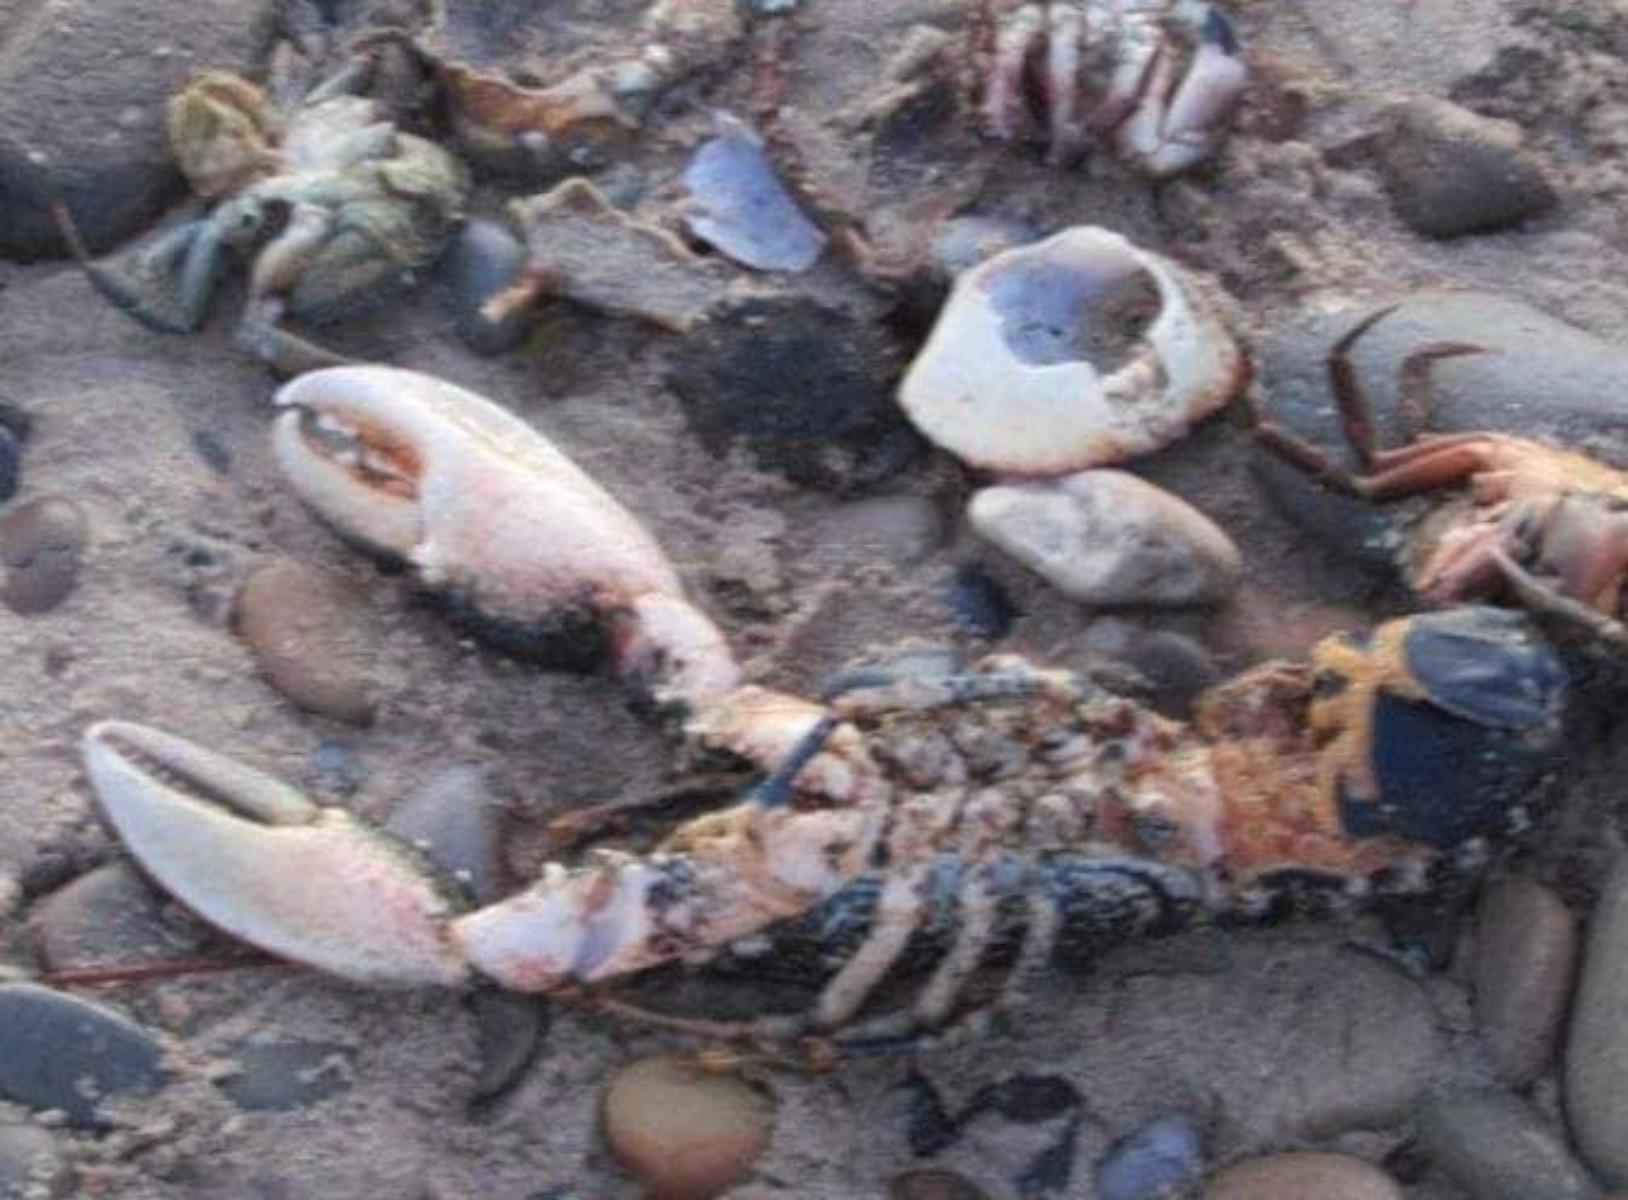 dead lobster surrounded by other dead crustaceans